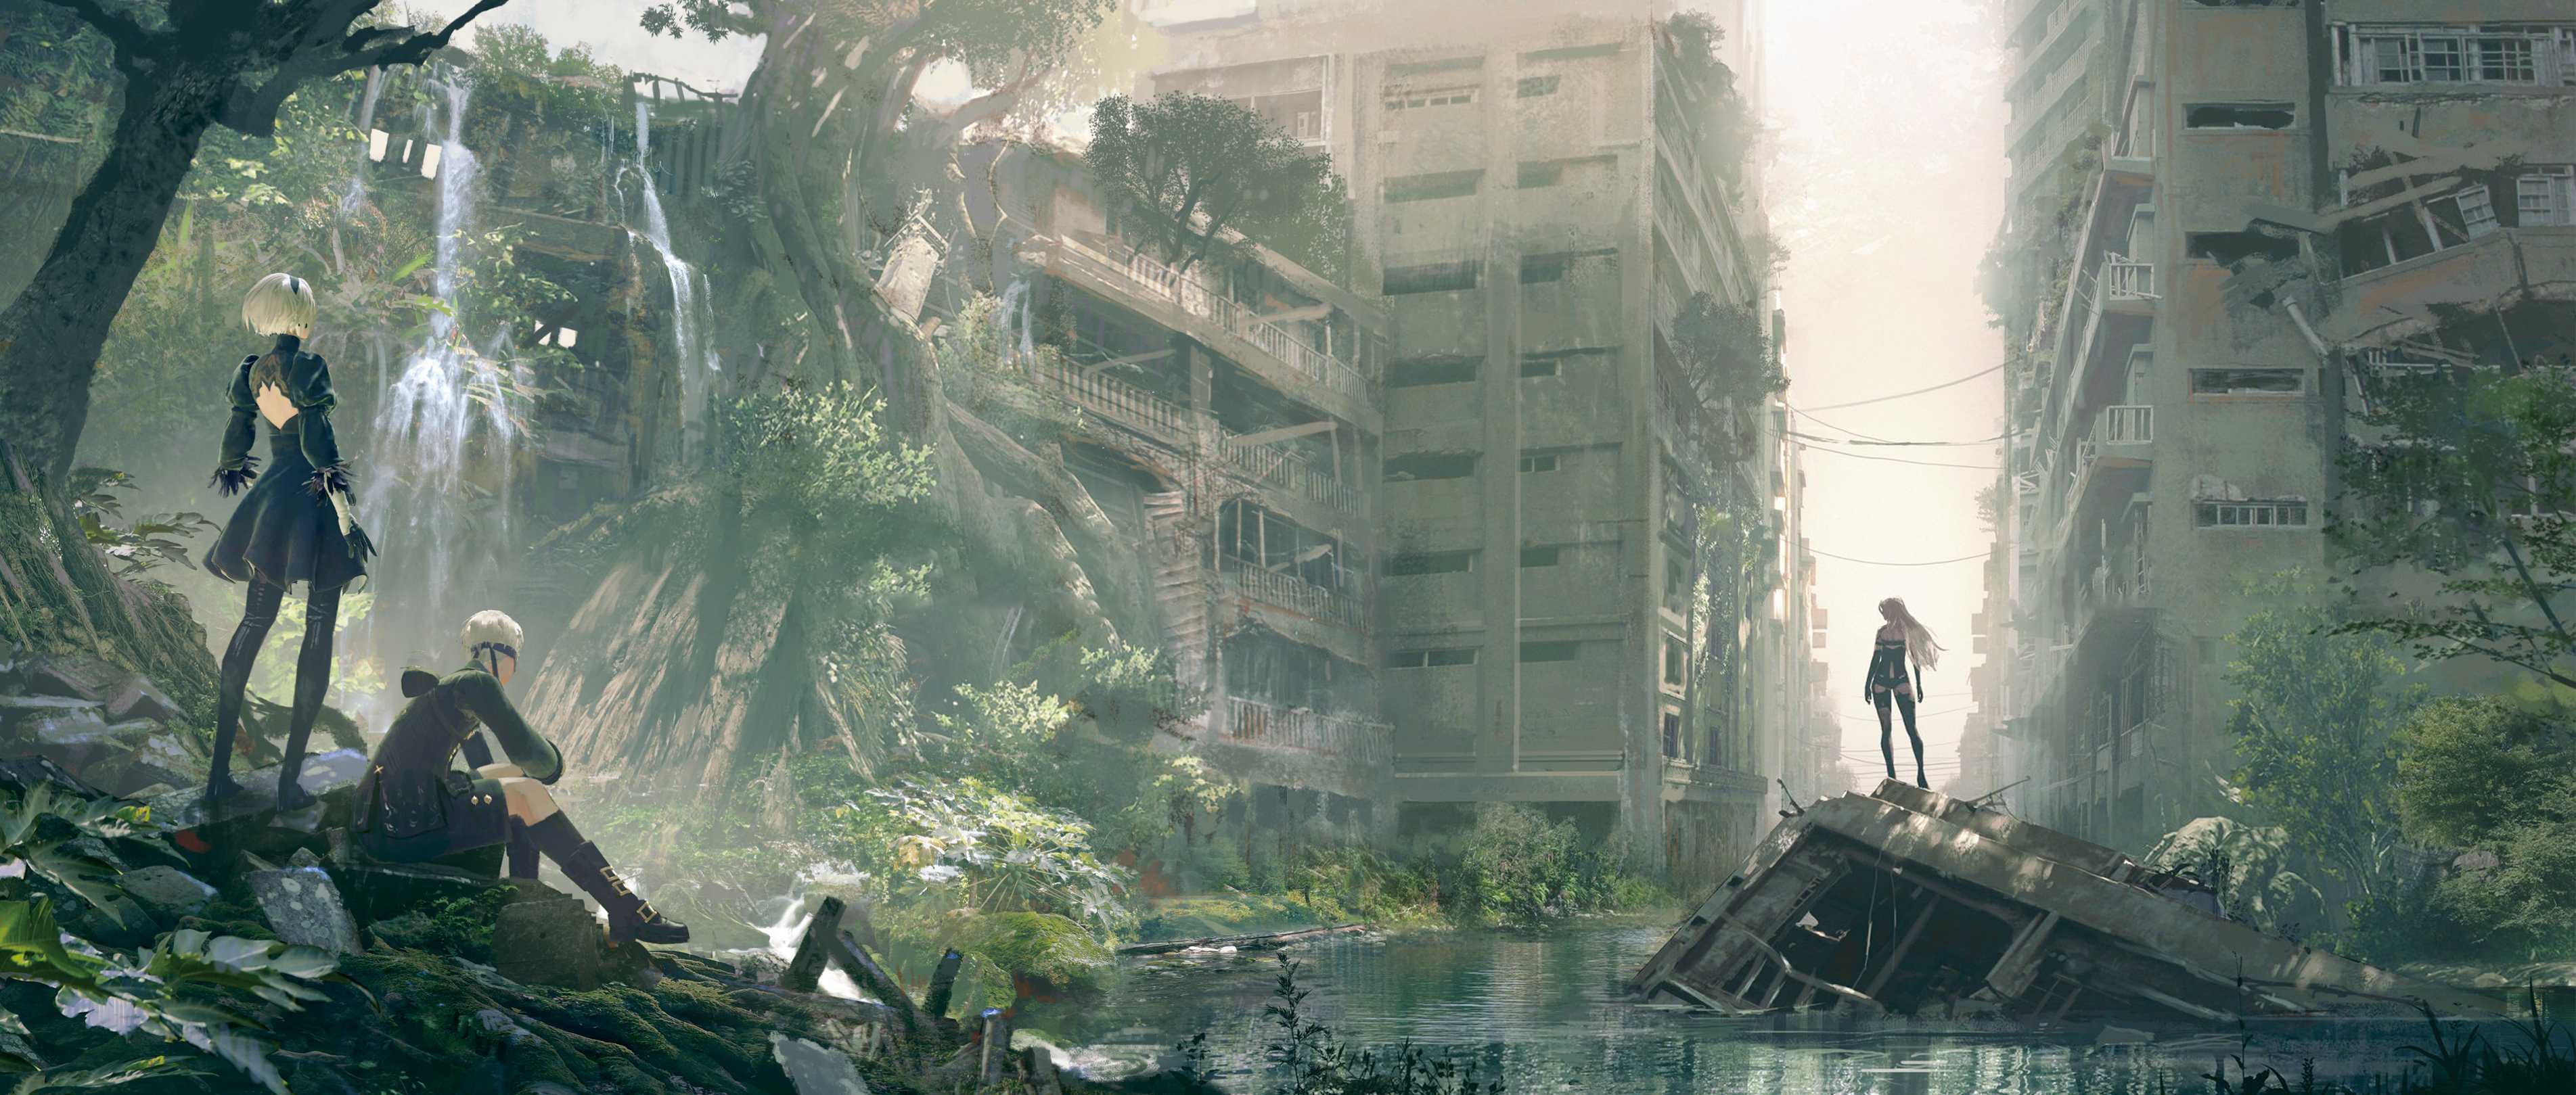 Nier Automata 2B 9S A2 Video Games Ruin Cityscape Apocalyptic Nature Trees Building Waterfall 3807x1619